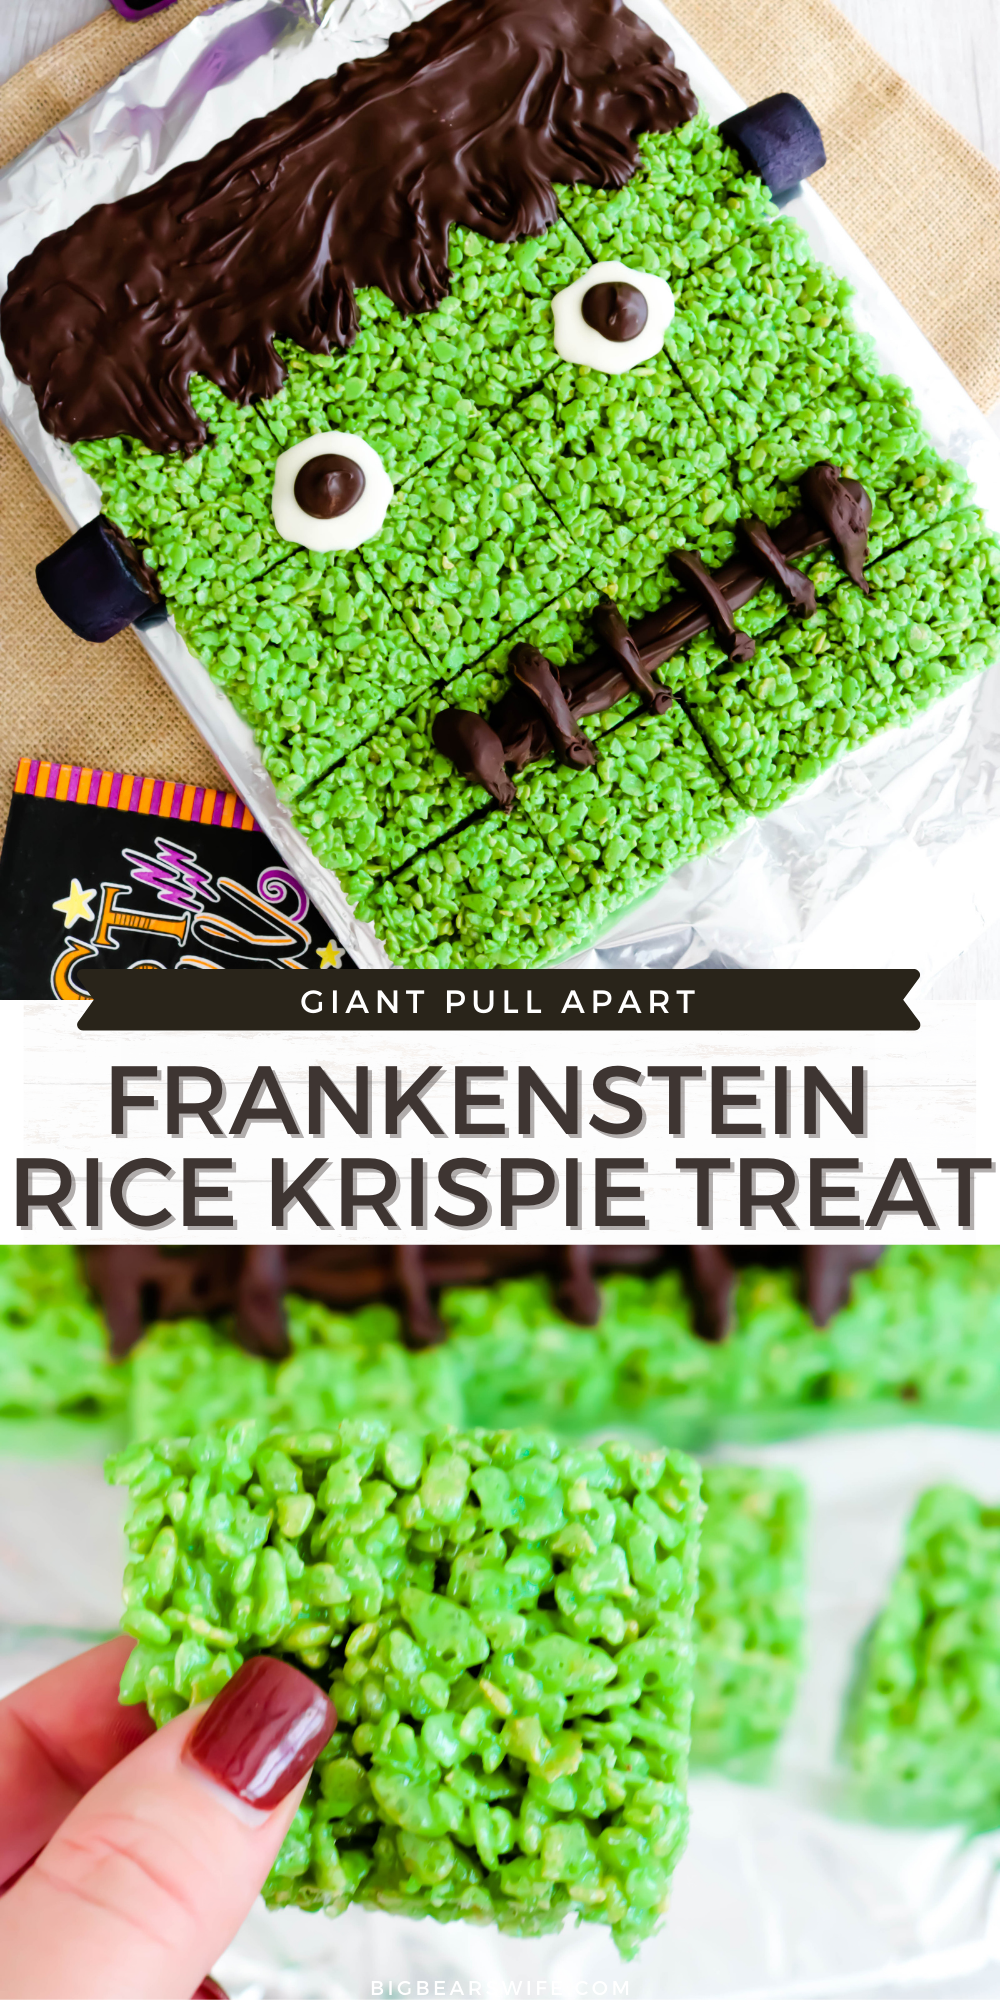 Need a fun Halloween Party dessert? This Giant Pull Apart Frankenstein Rice Krispie Treat is super easy to make and great for a group or Halloween dinner party! Just like my Frankenstein Rice Krispie Treats but on a larger scale for a crowd!  via @bigbearswife